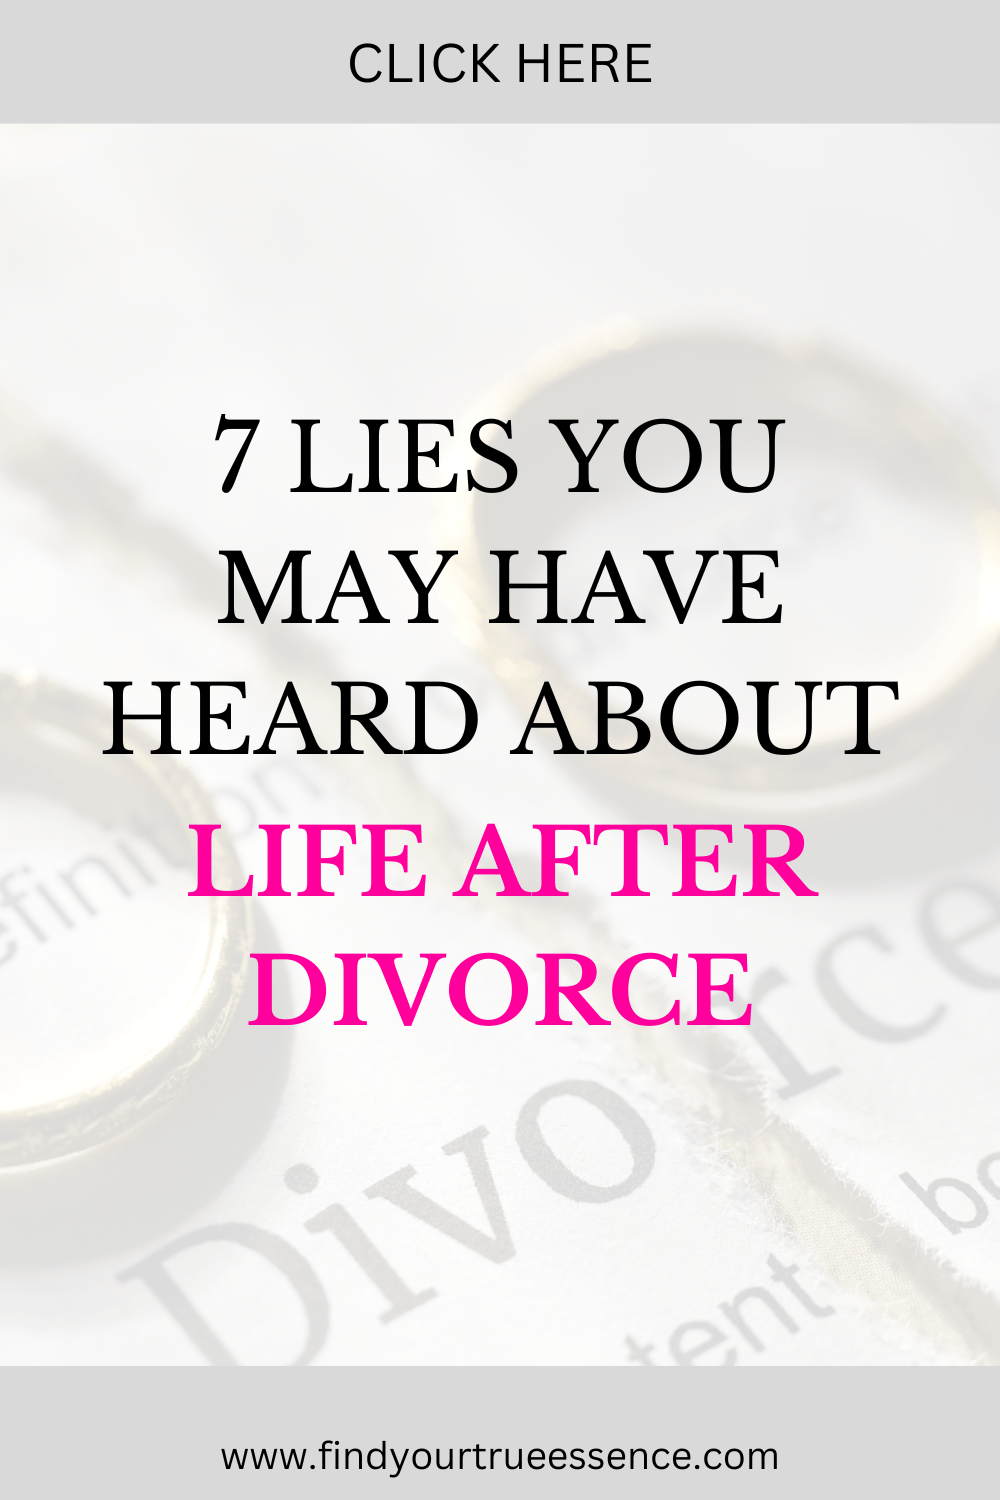 7 Lies You May Have Heard About Life After Divorce